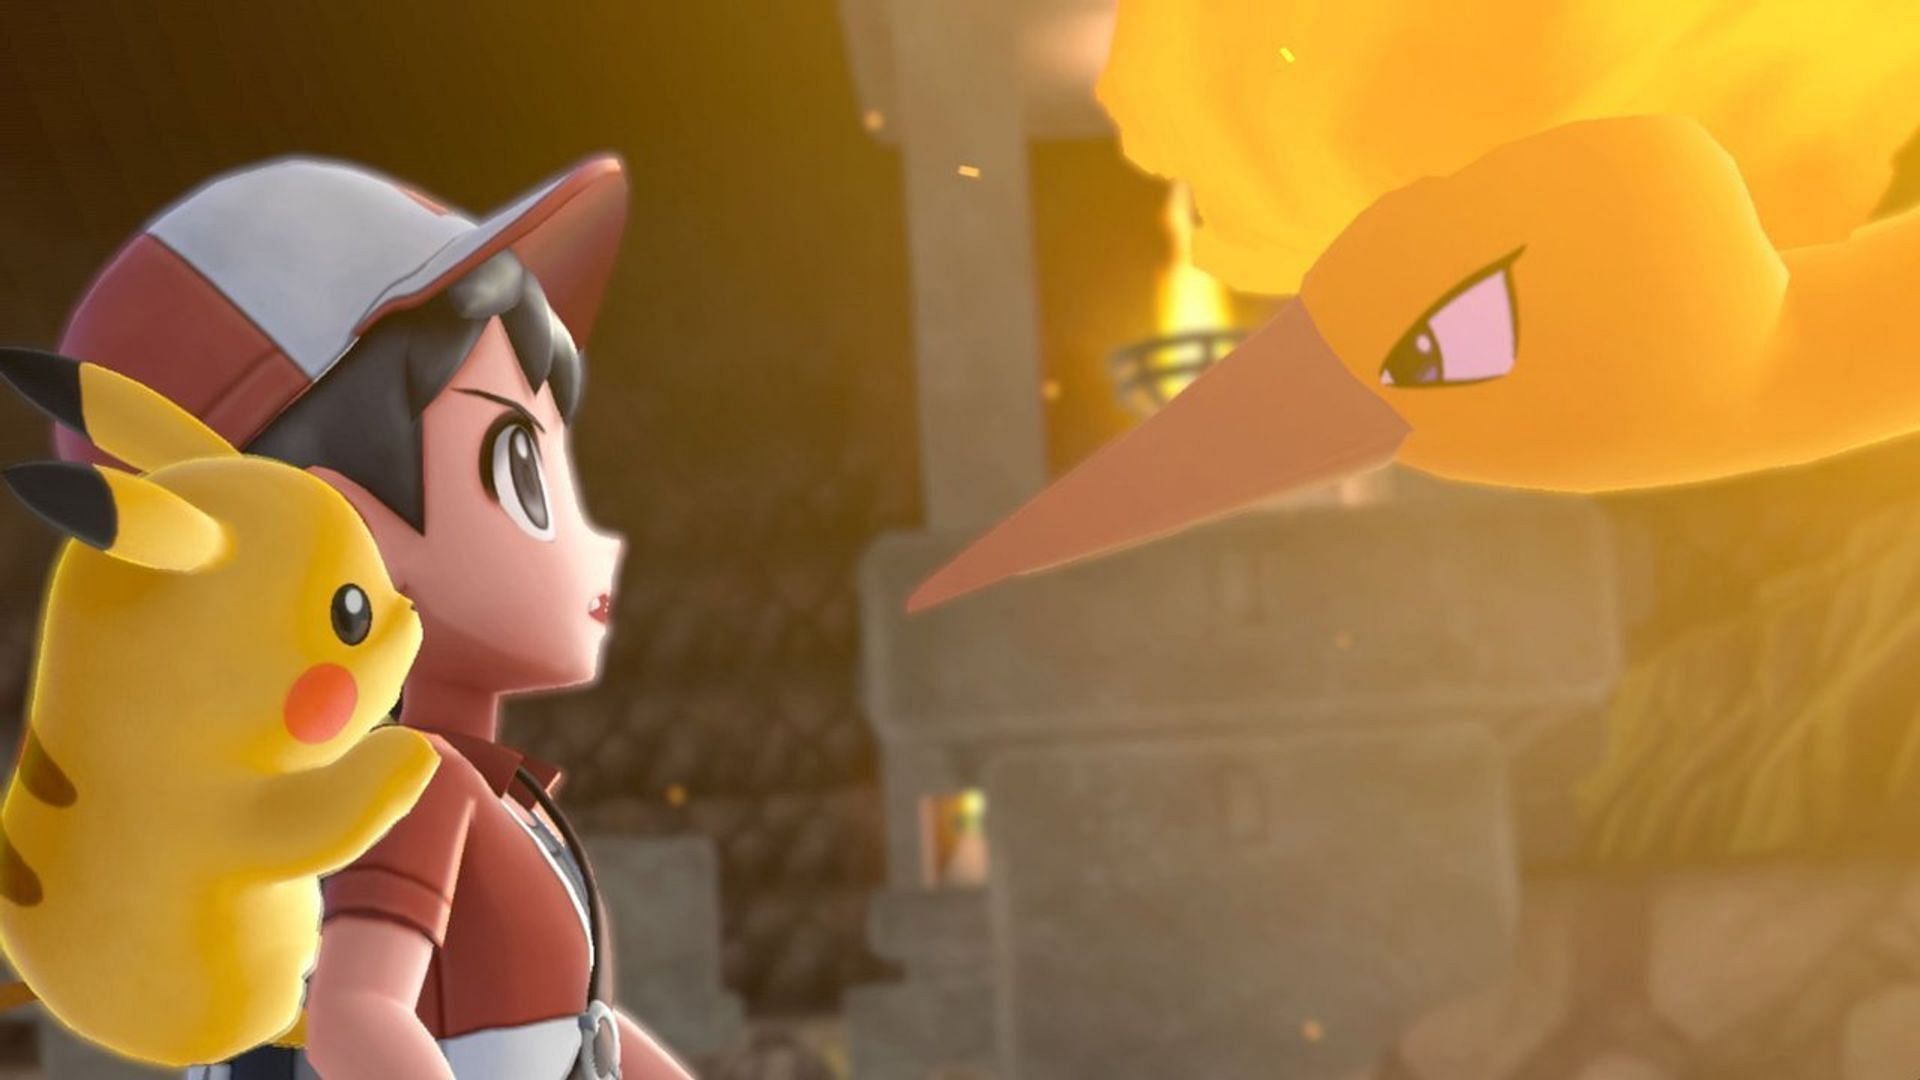 Pokémon Let's Go Victory Road and how to find Moltres - available